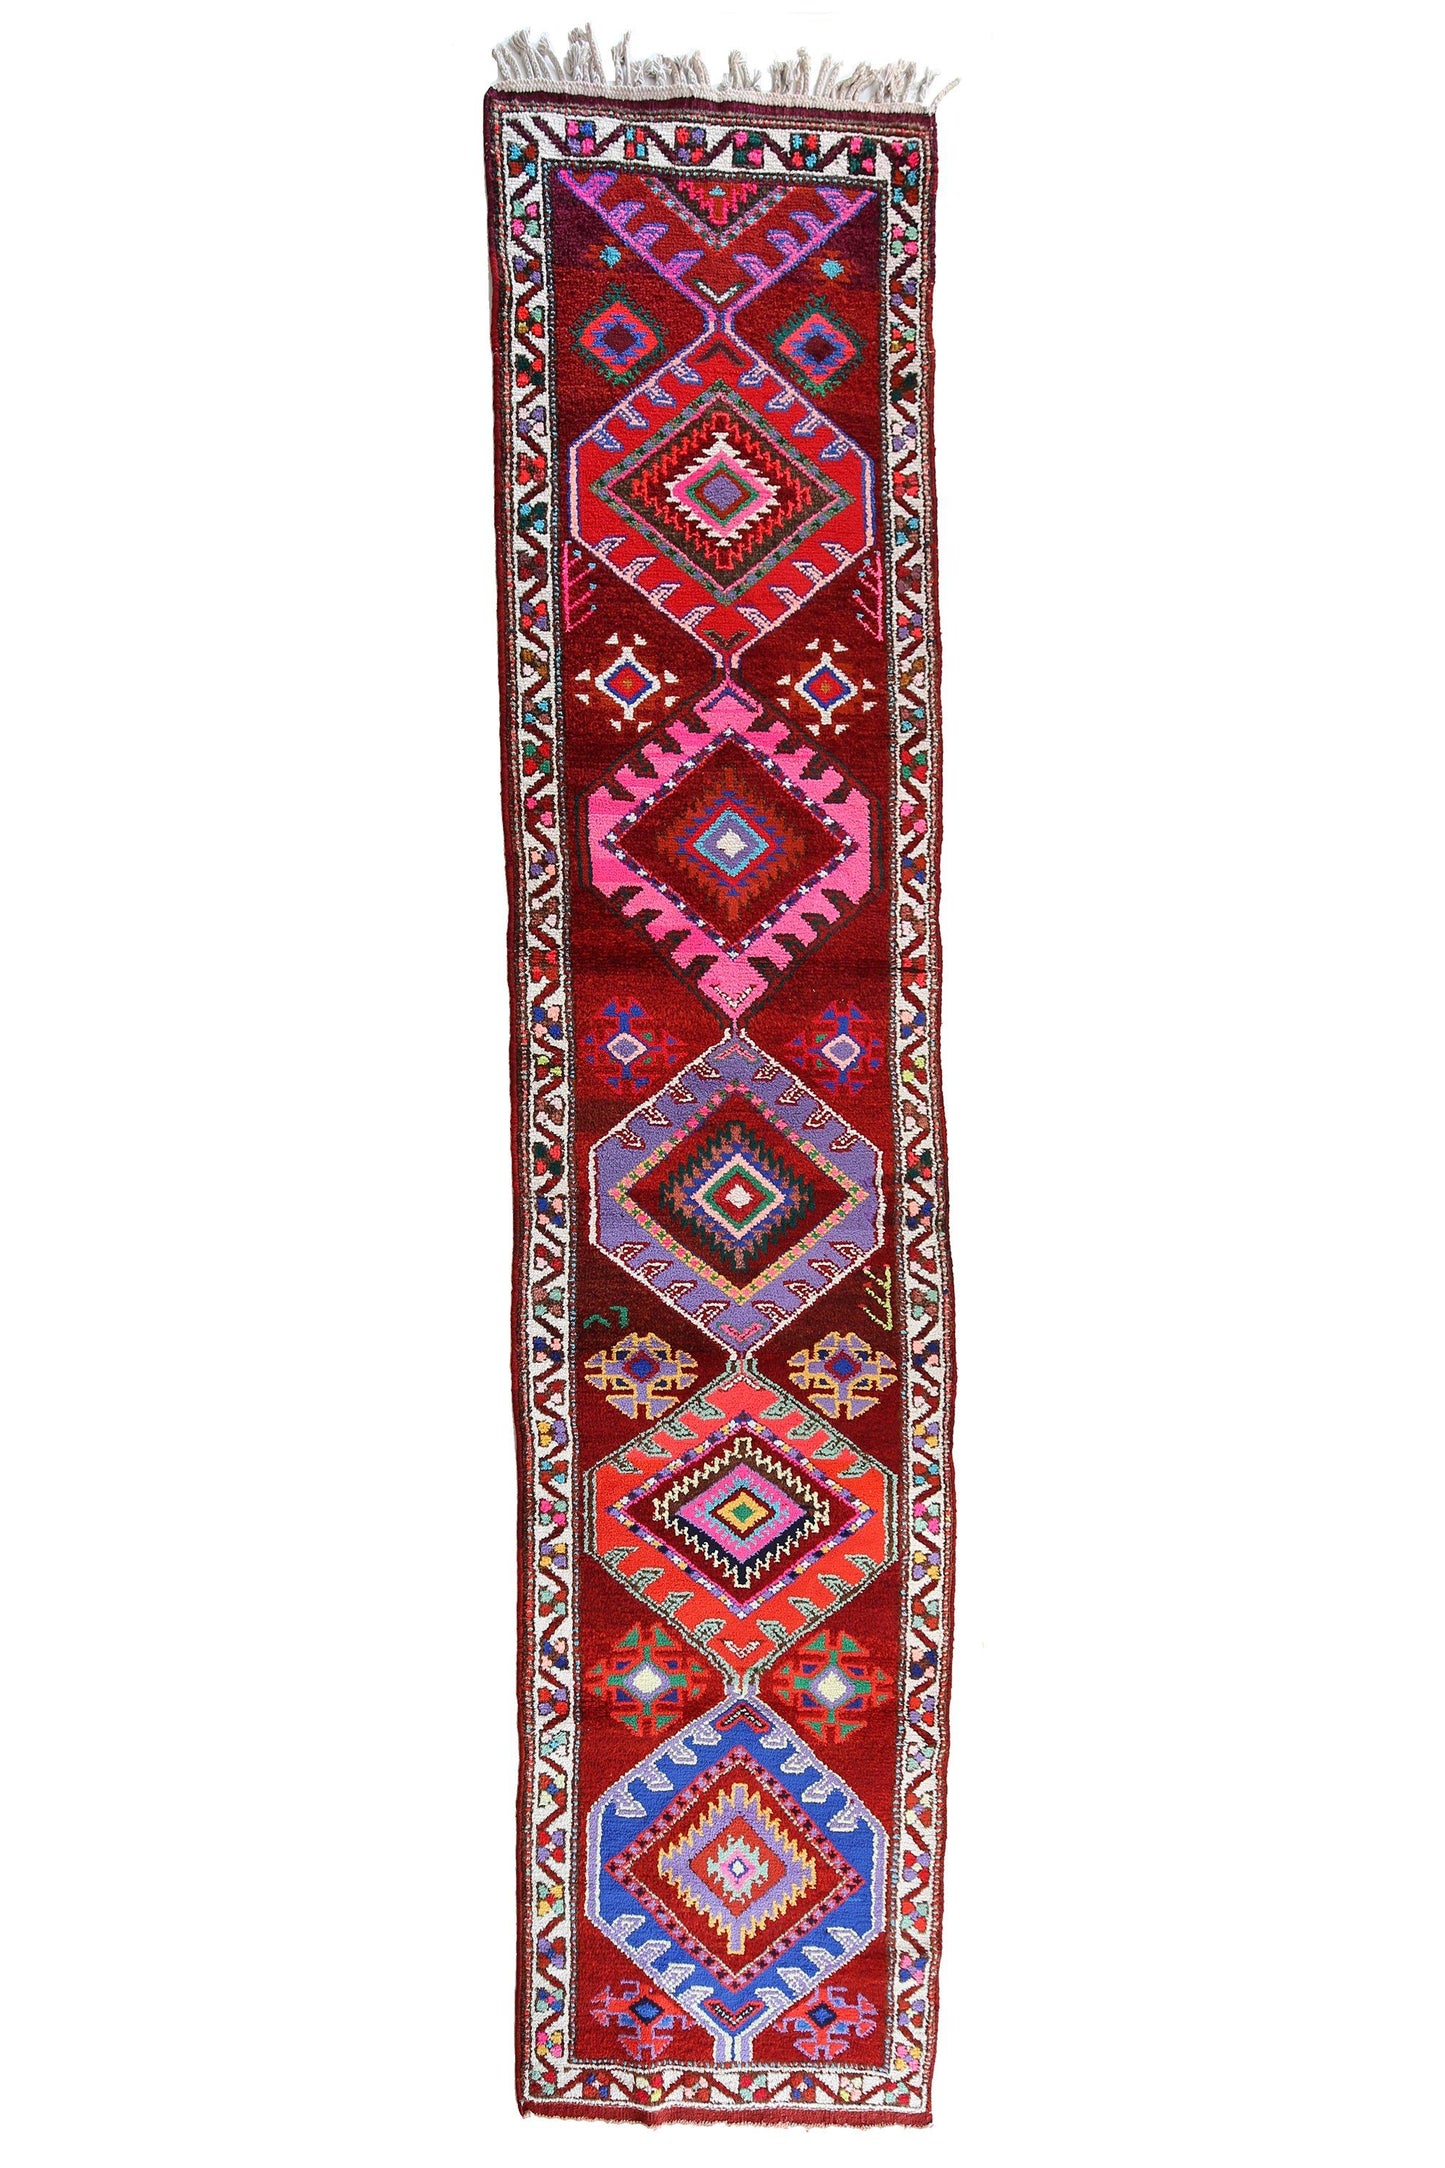 'Kaleidoscope' Tribal Runner Rug - Canary Lane - Curated Textiles